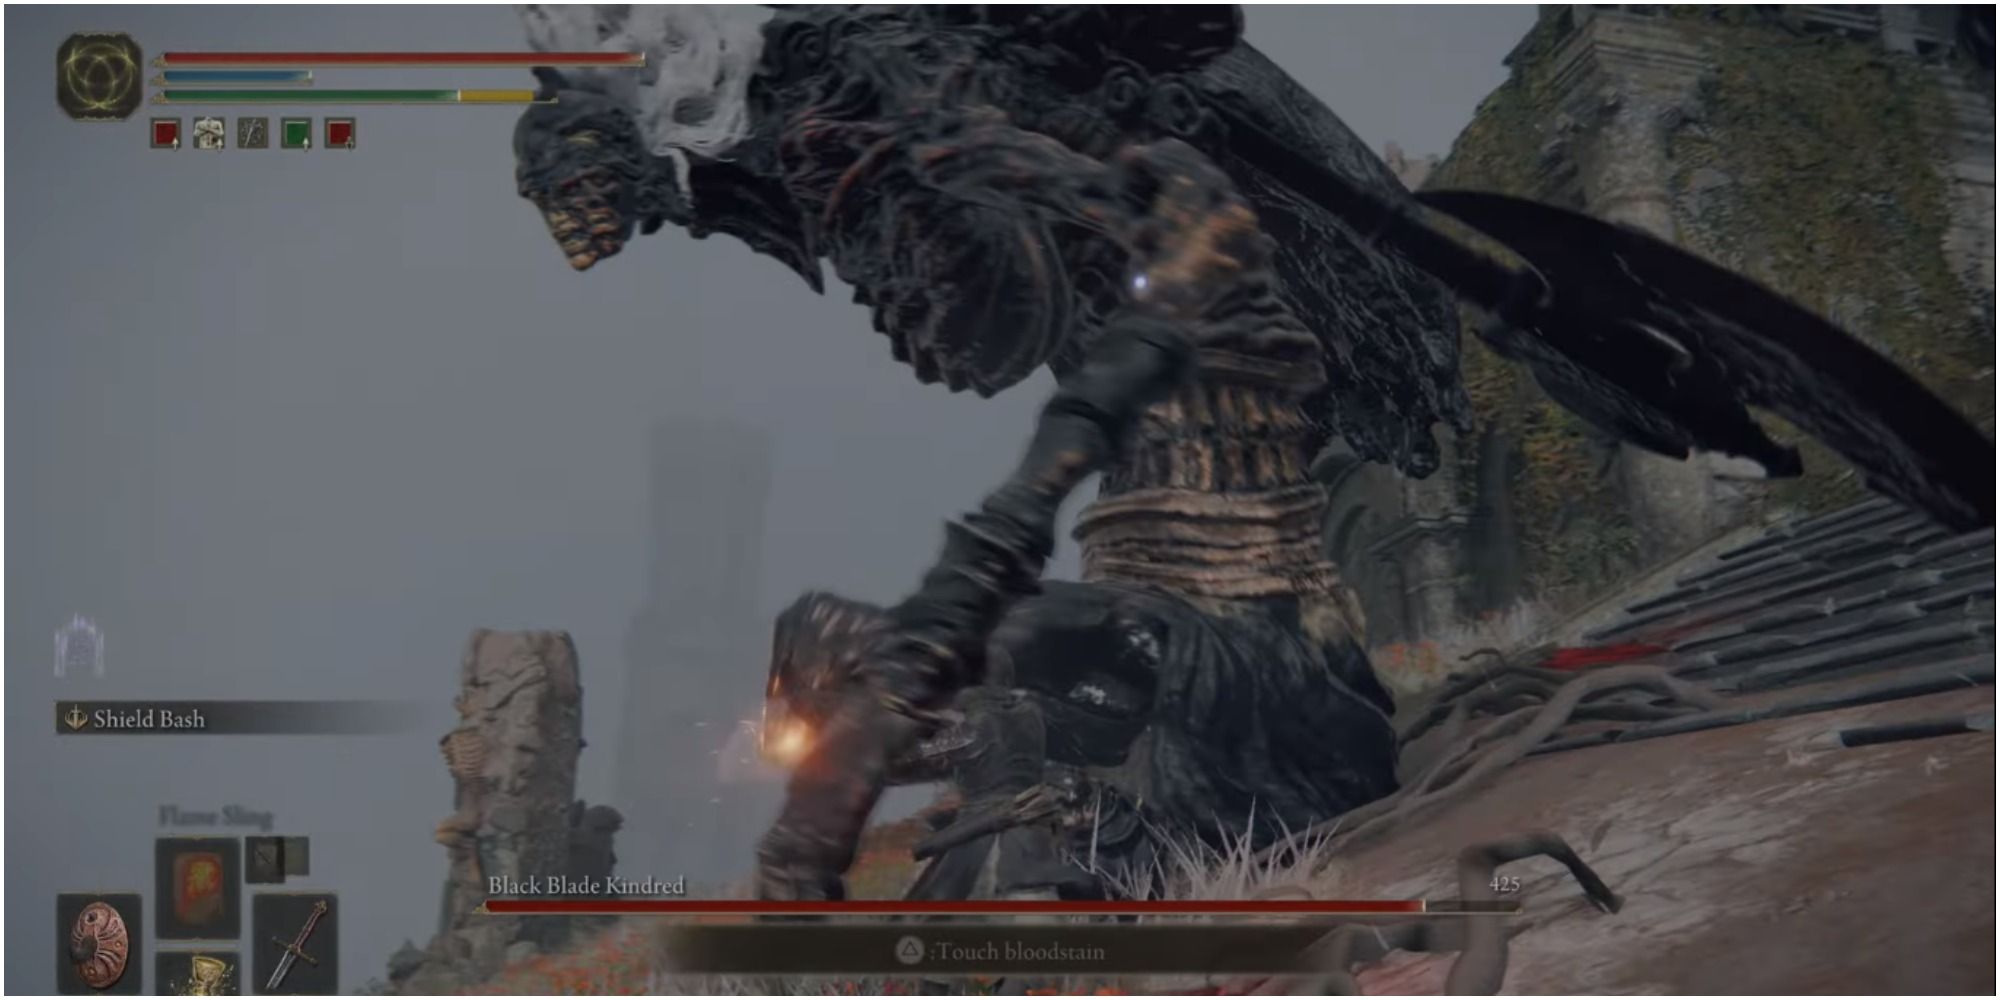 The player using a melee weapon to attack the boss.